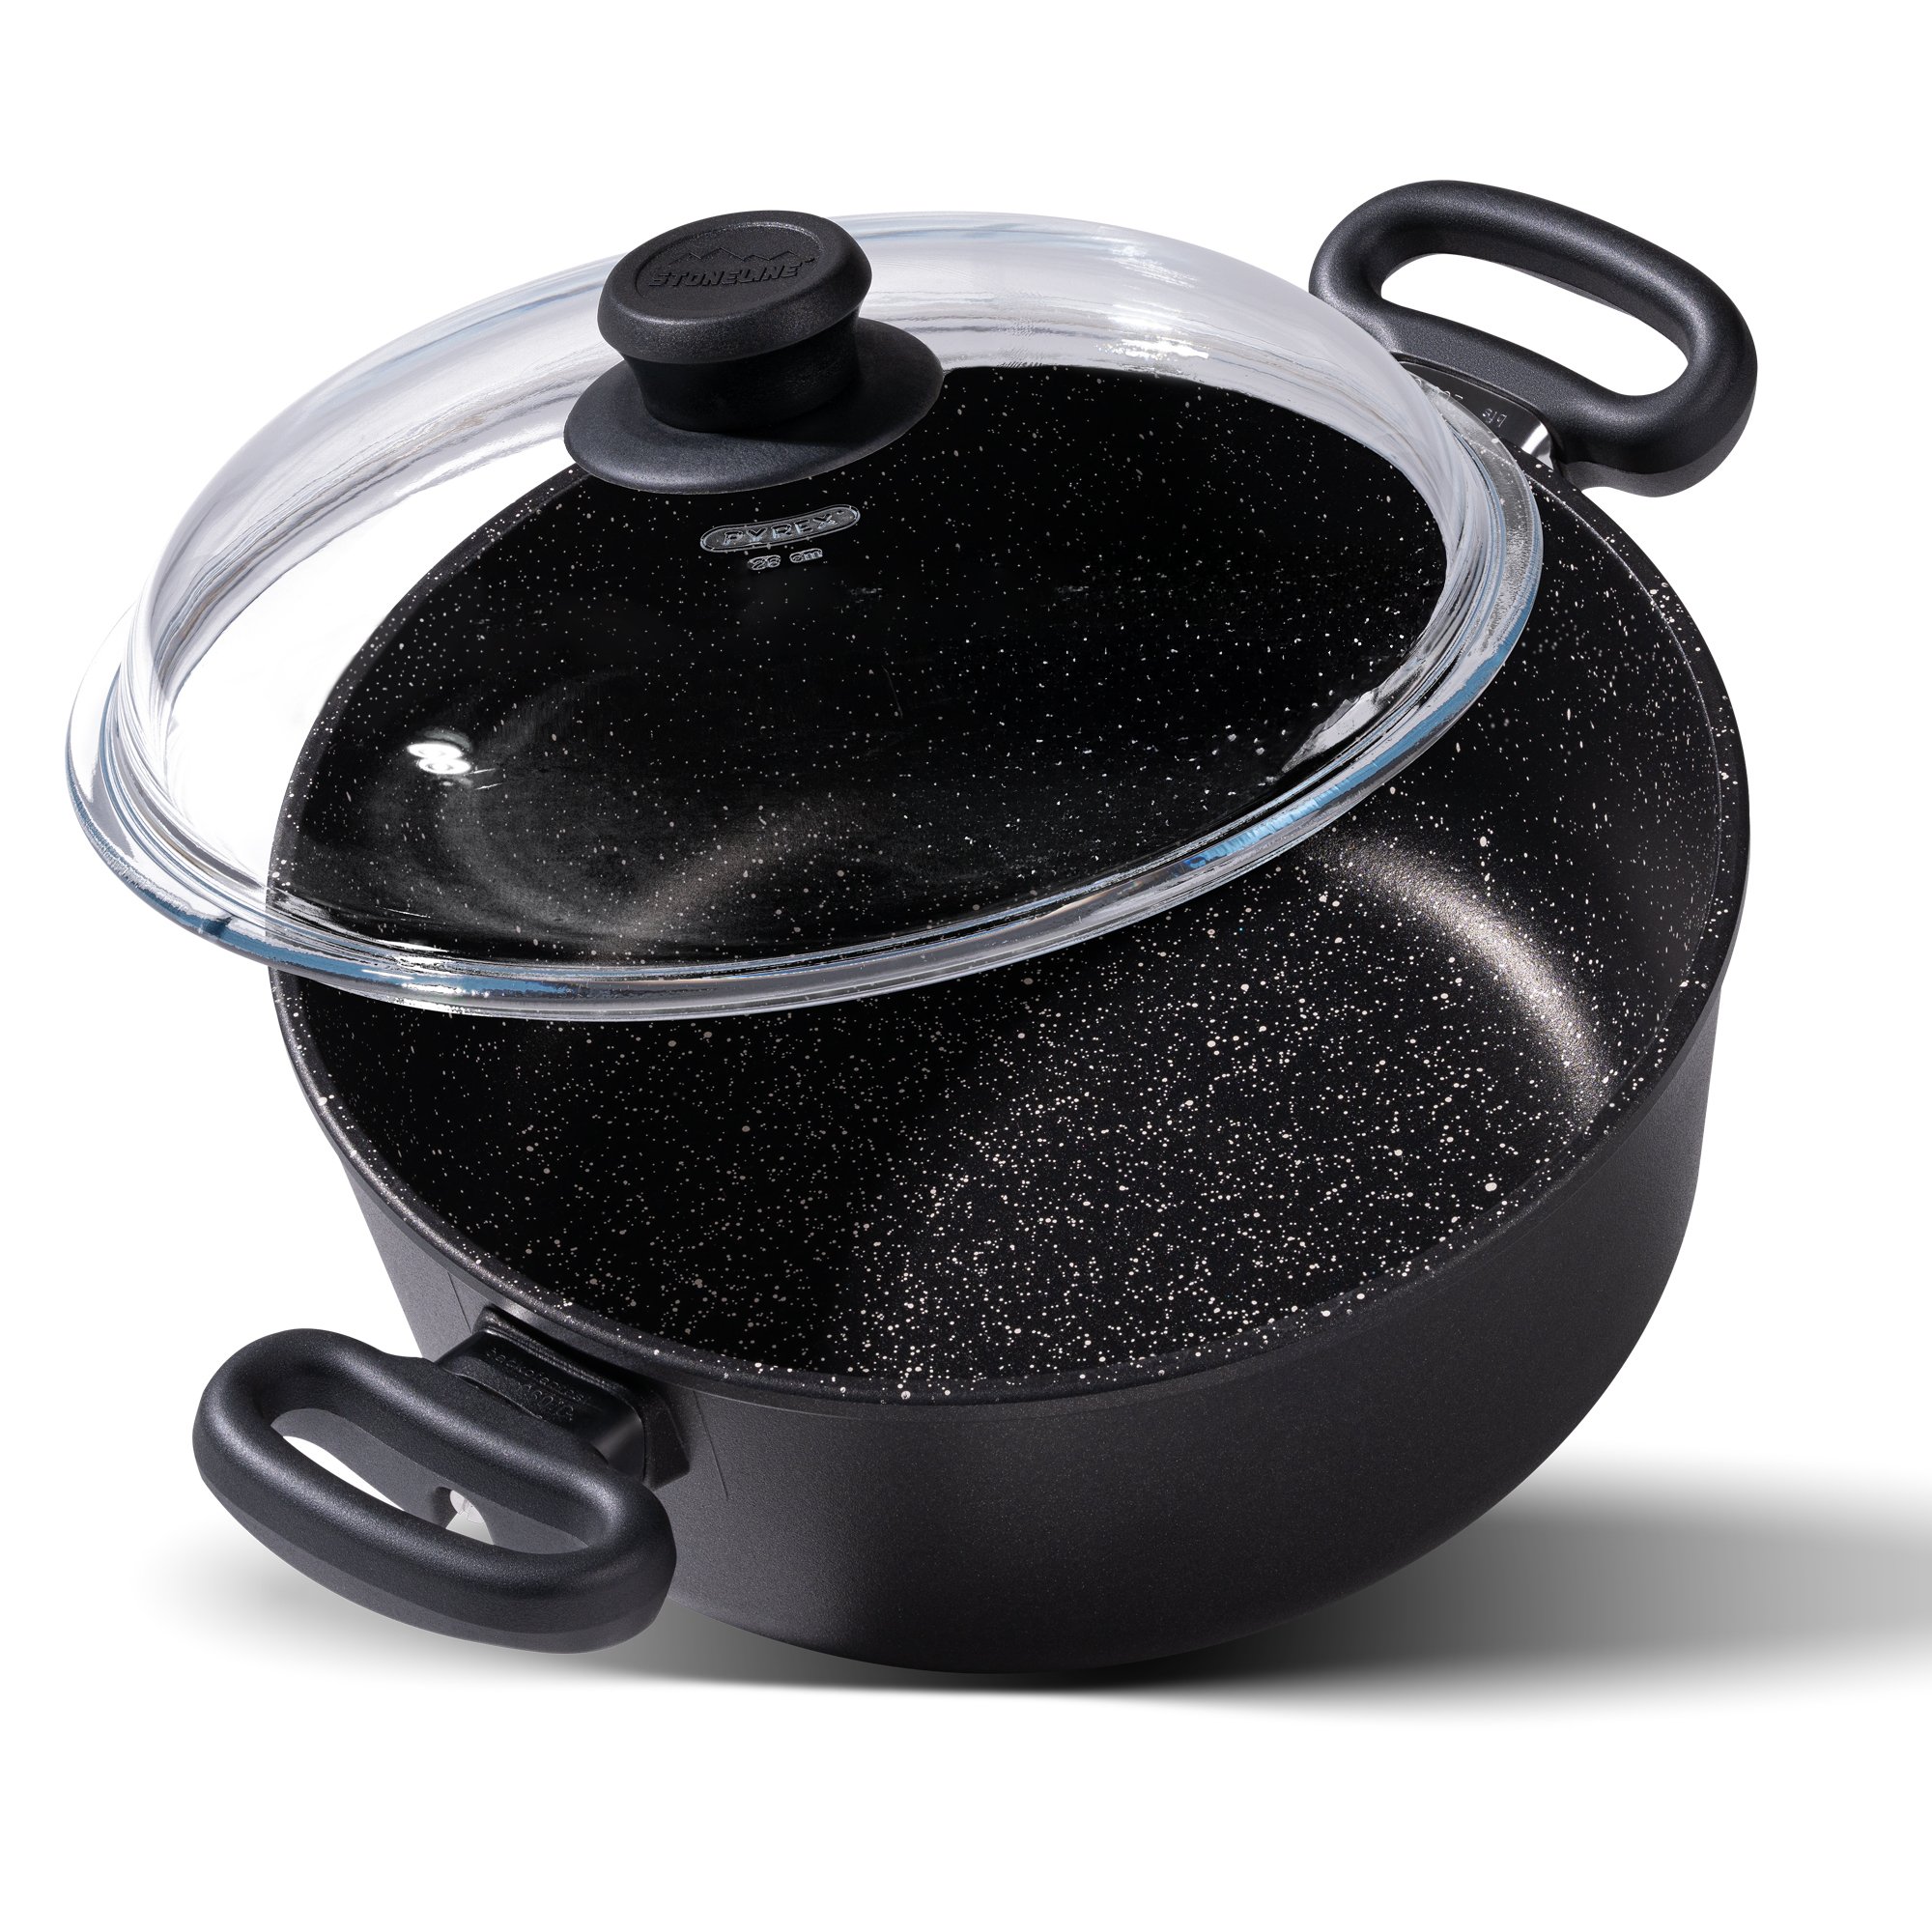 STONELINE® Cooking Pot 24 cm, with Lid, Cast Non-Stick Pot | Made in Germany